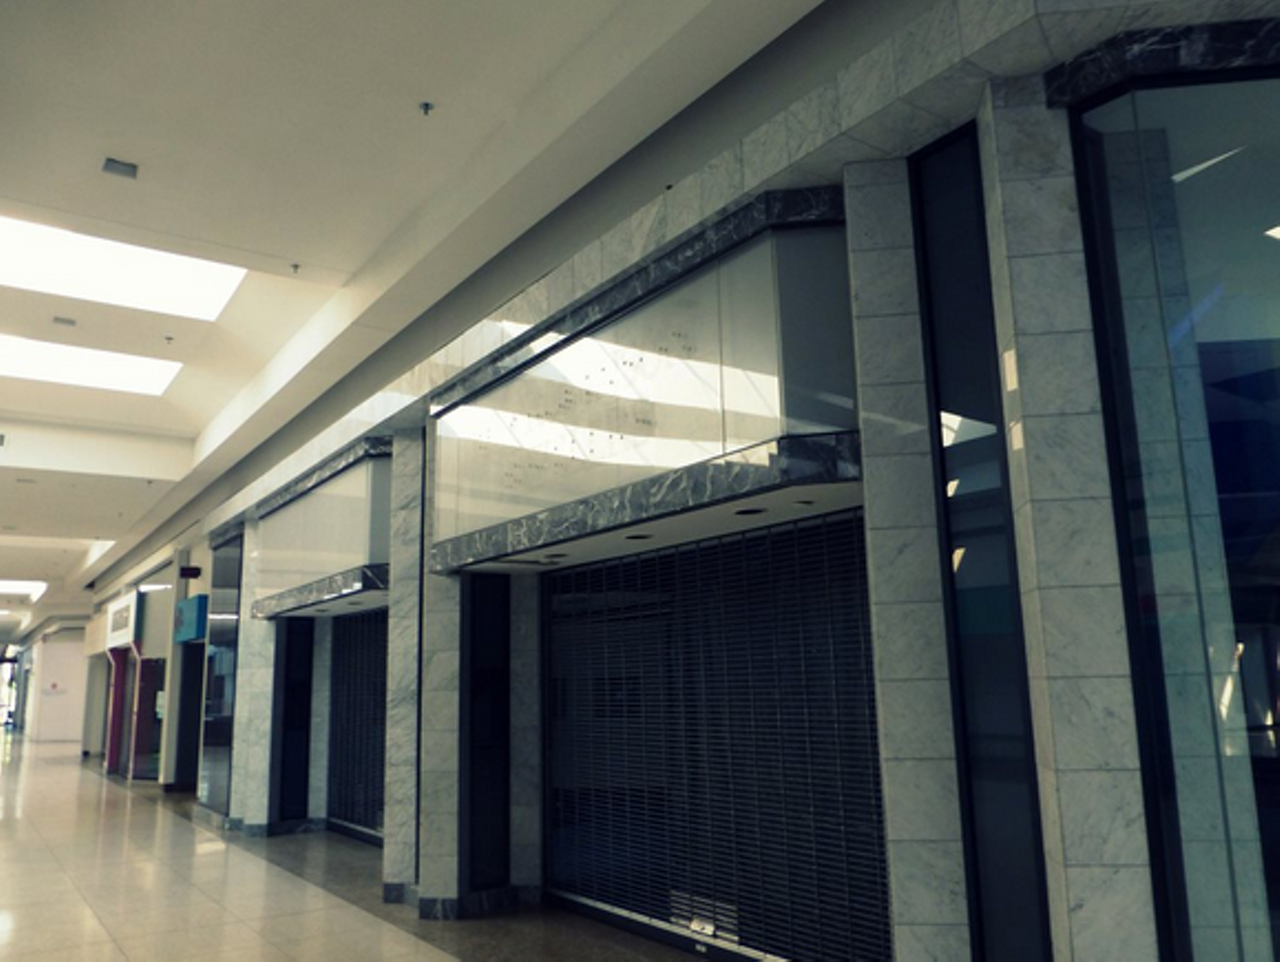 Eerie Photos of the Old and Abandoned Euclid Square Mall